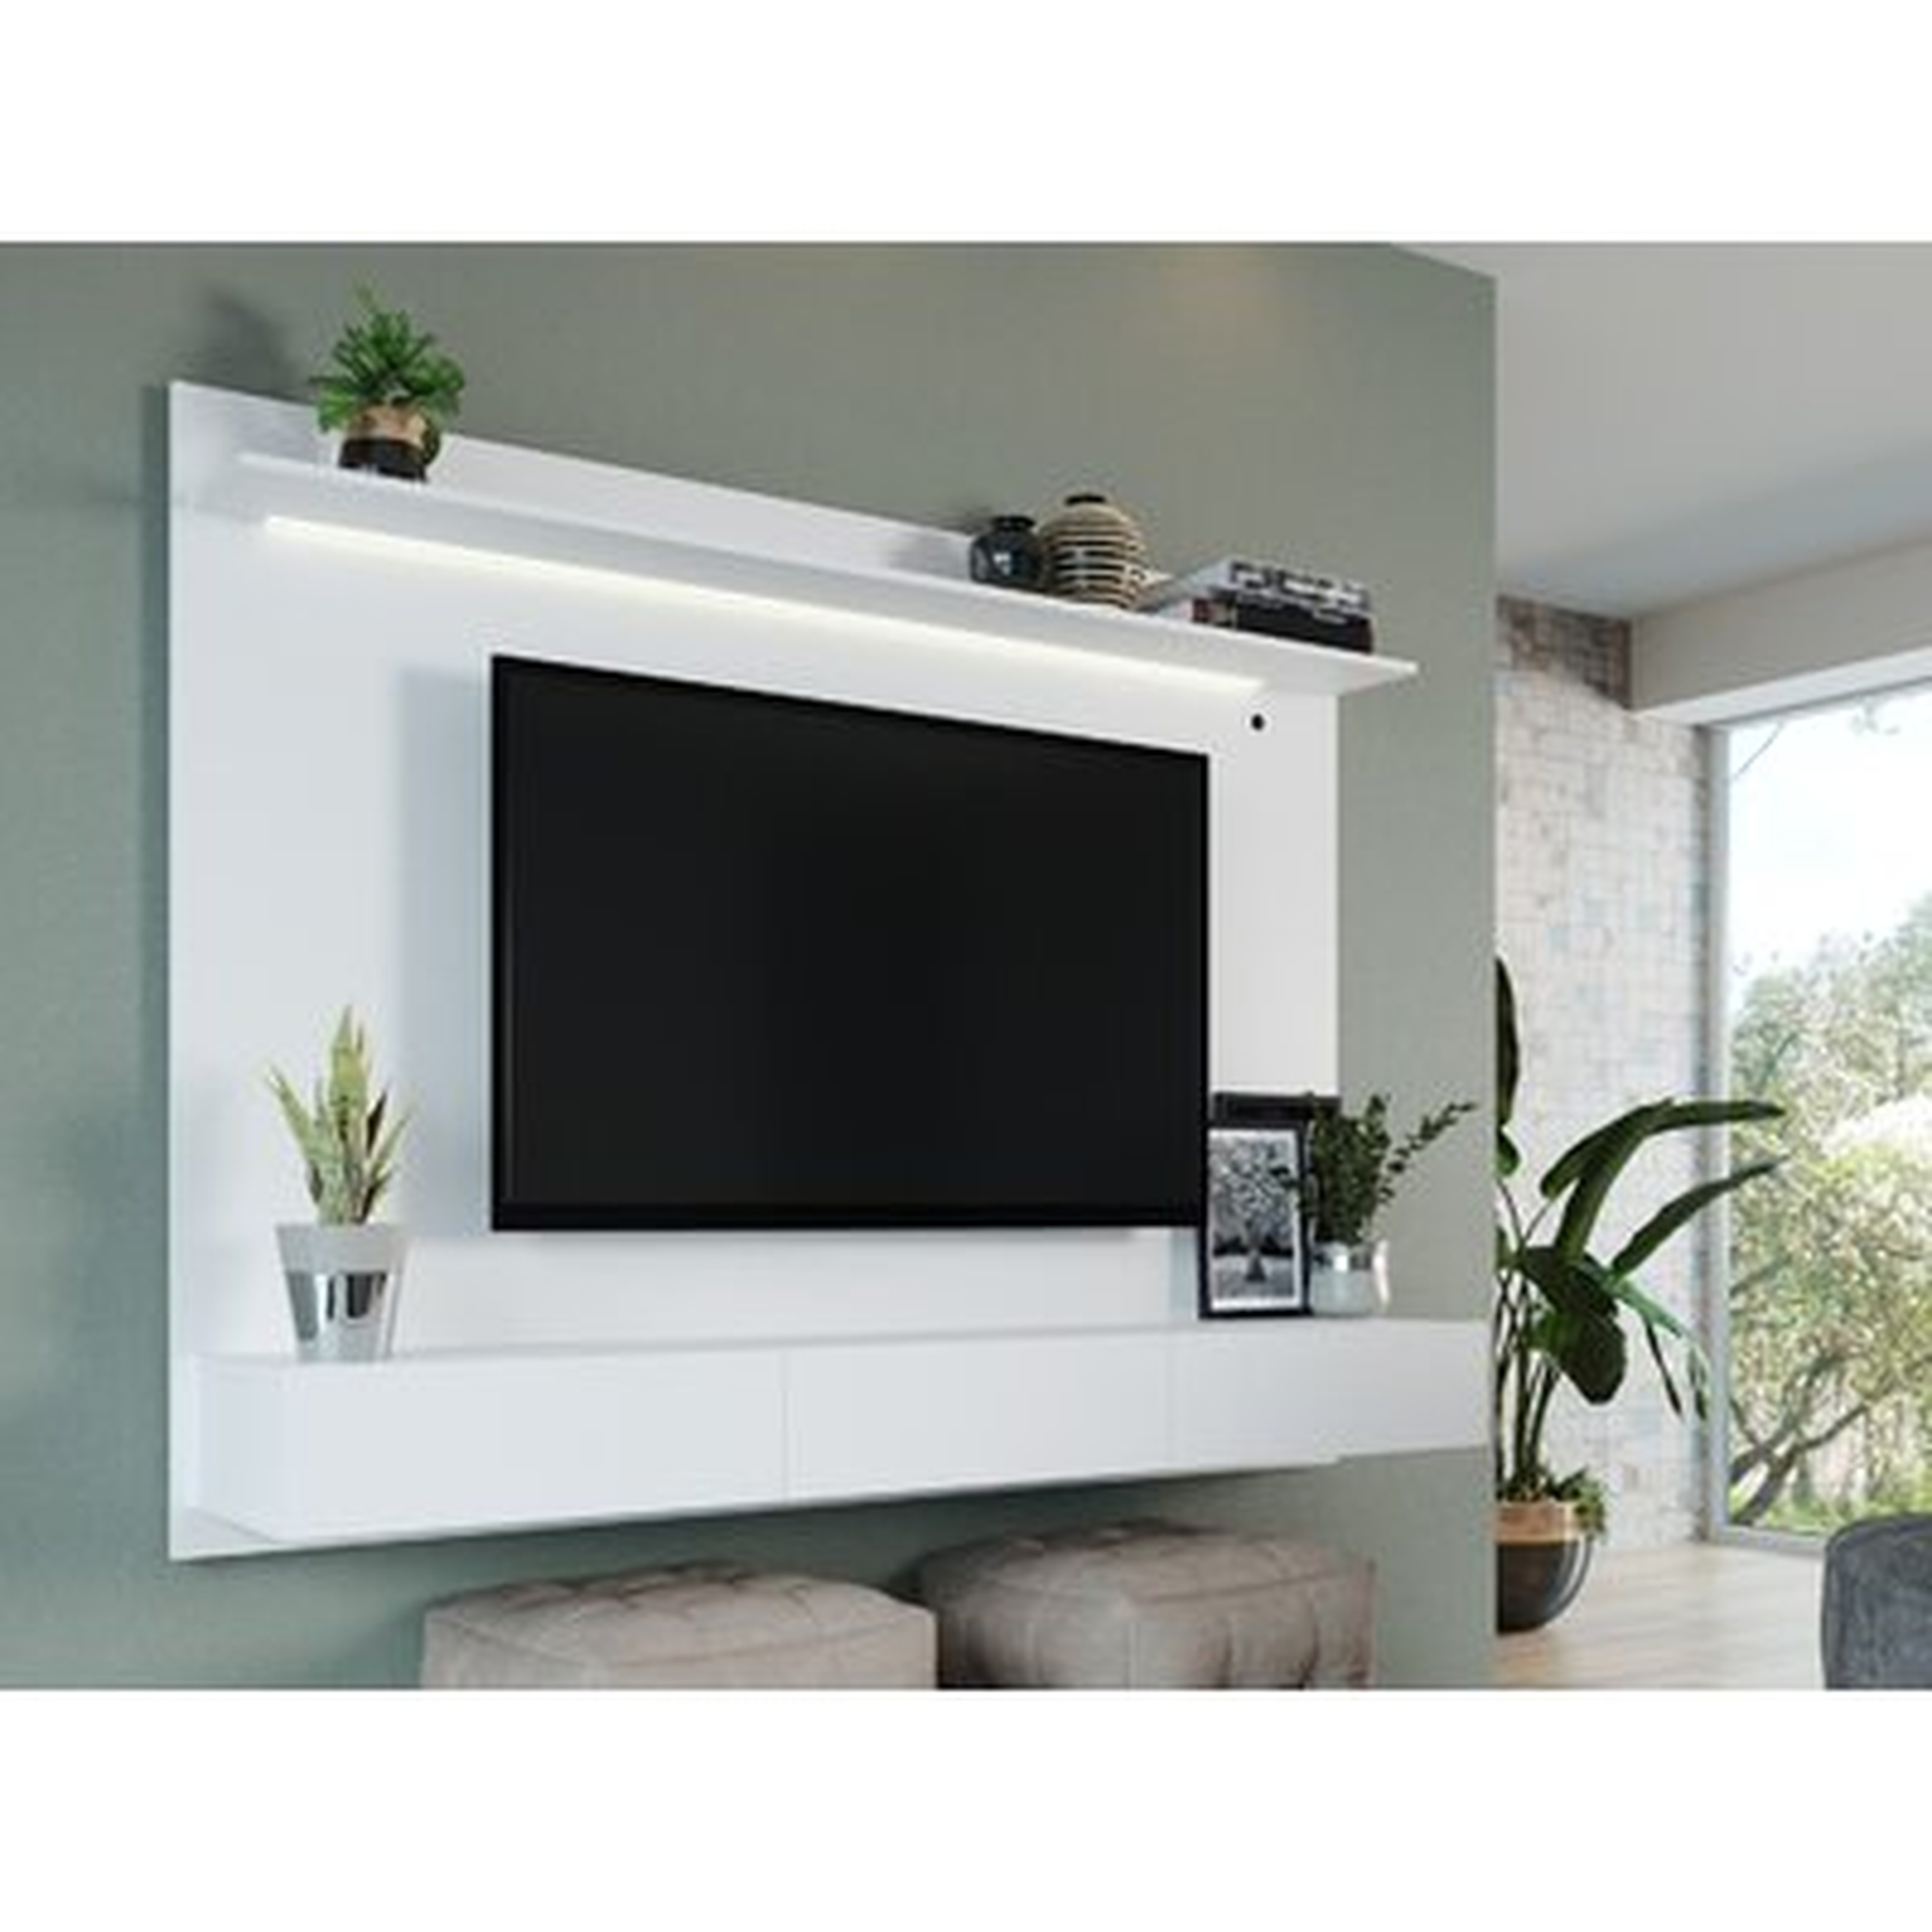 Sunseri Solid Wood Floating Entertainment Center for TVs up to 70" - Wayfair